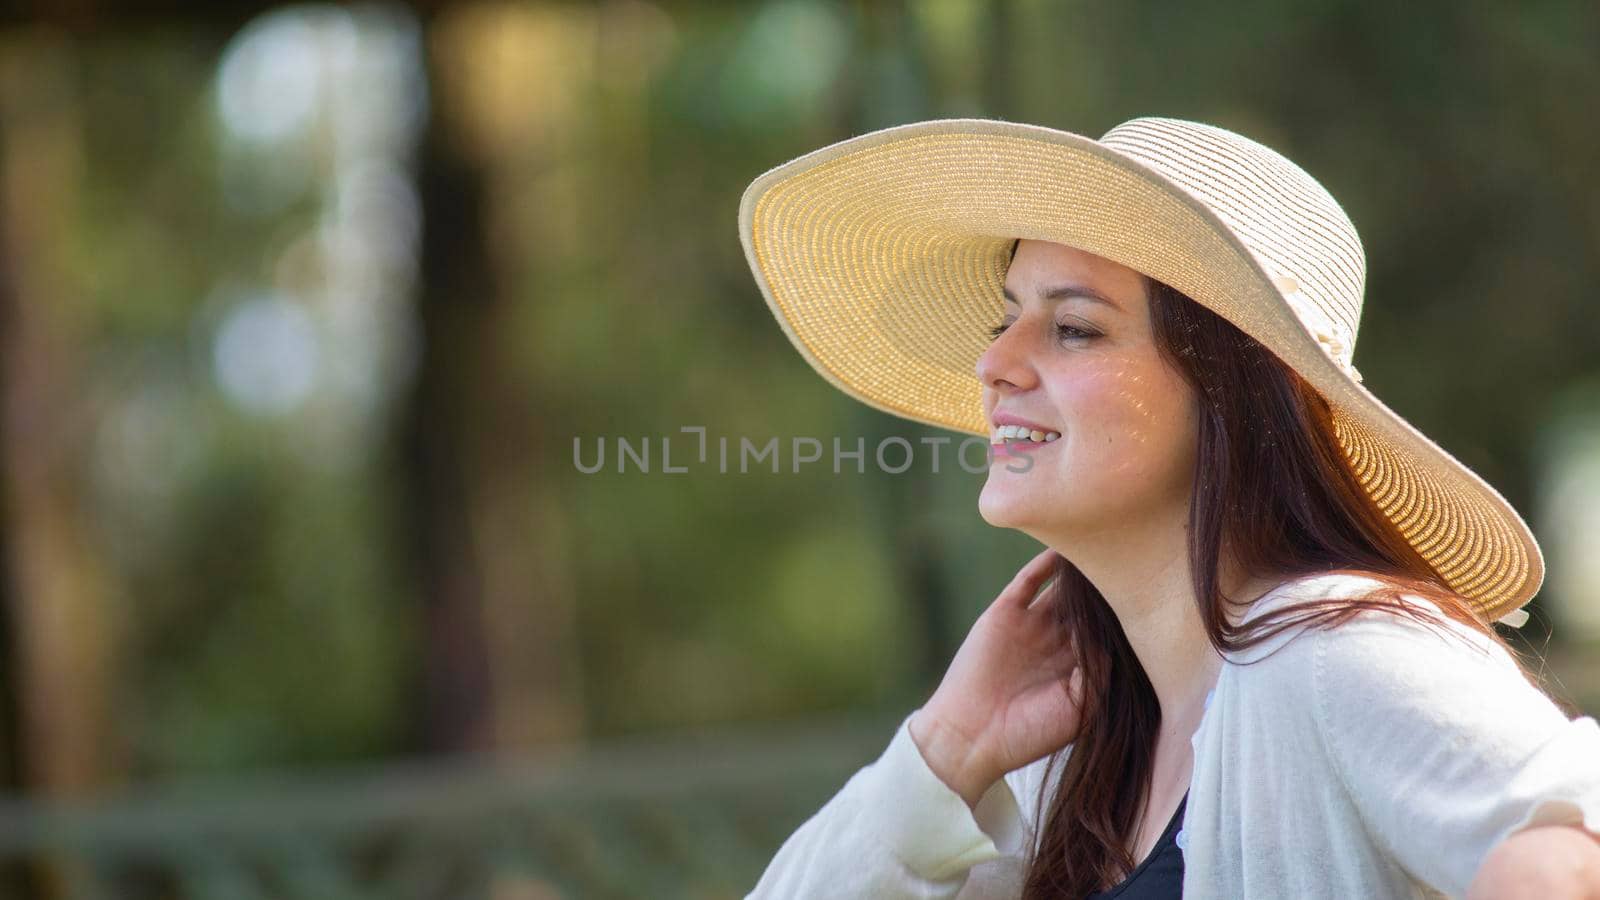 Portrait of beautiful young Hispanic woman with long hair with a hat very cheerful sitting on a park bench against a background of unfocused green trees by alejomiranda